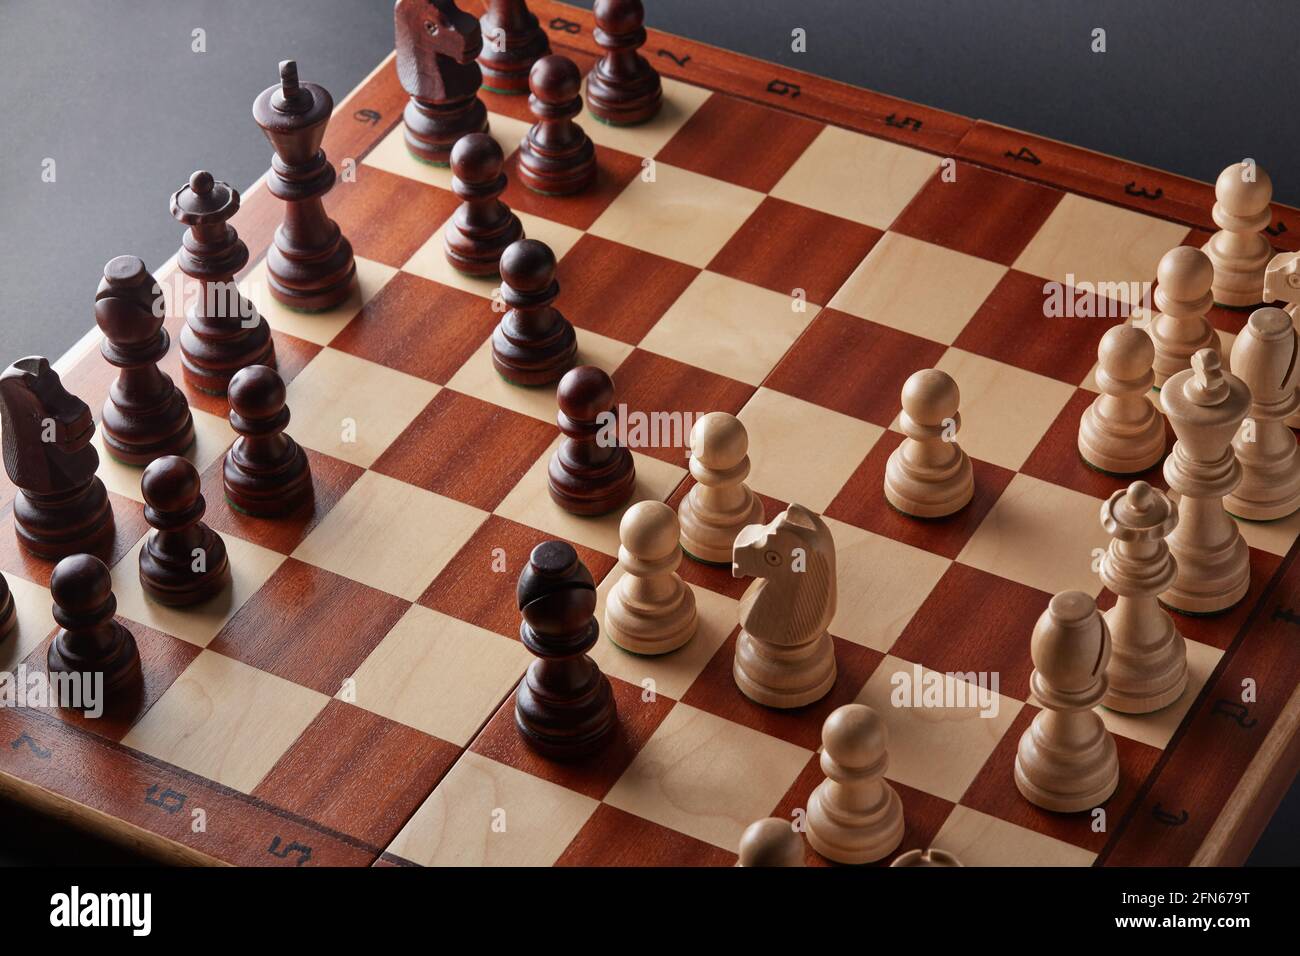 Browse Free HD Images of Chess Pieces Set Up On A Wooden Chess Board